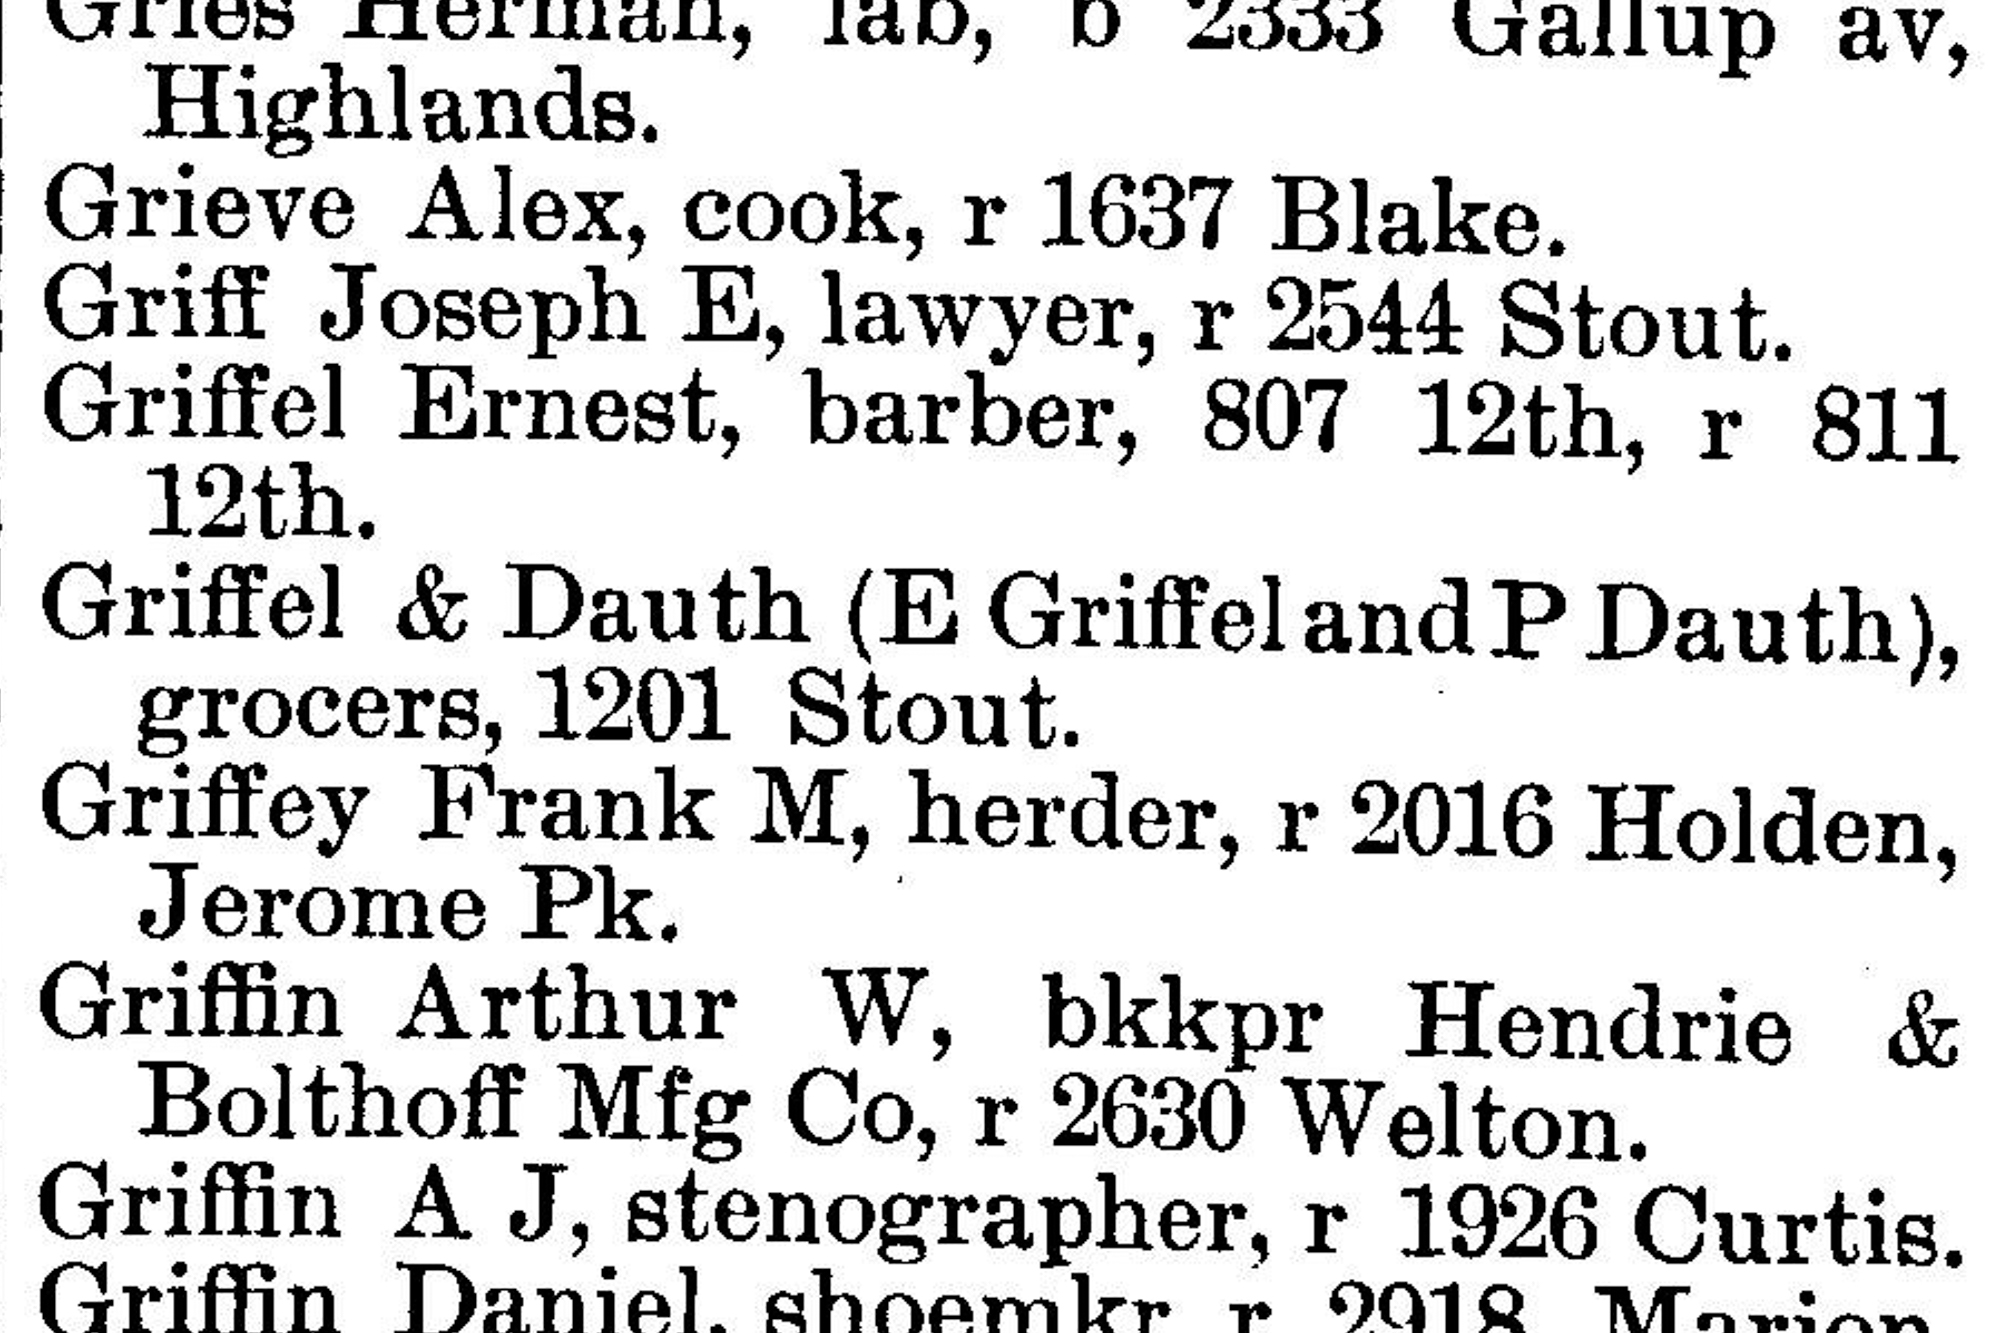 Dauth Family Archive - 1892 - Denver Directory - Entry For Griffel and Dauth